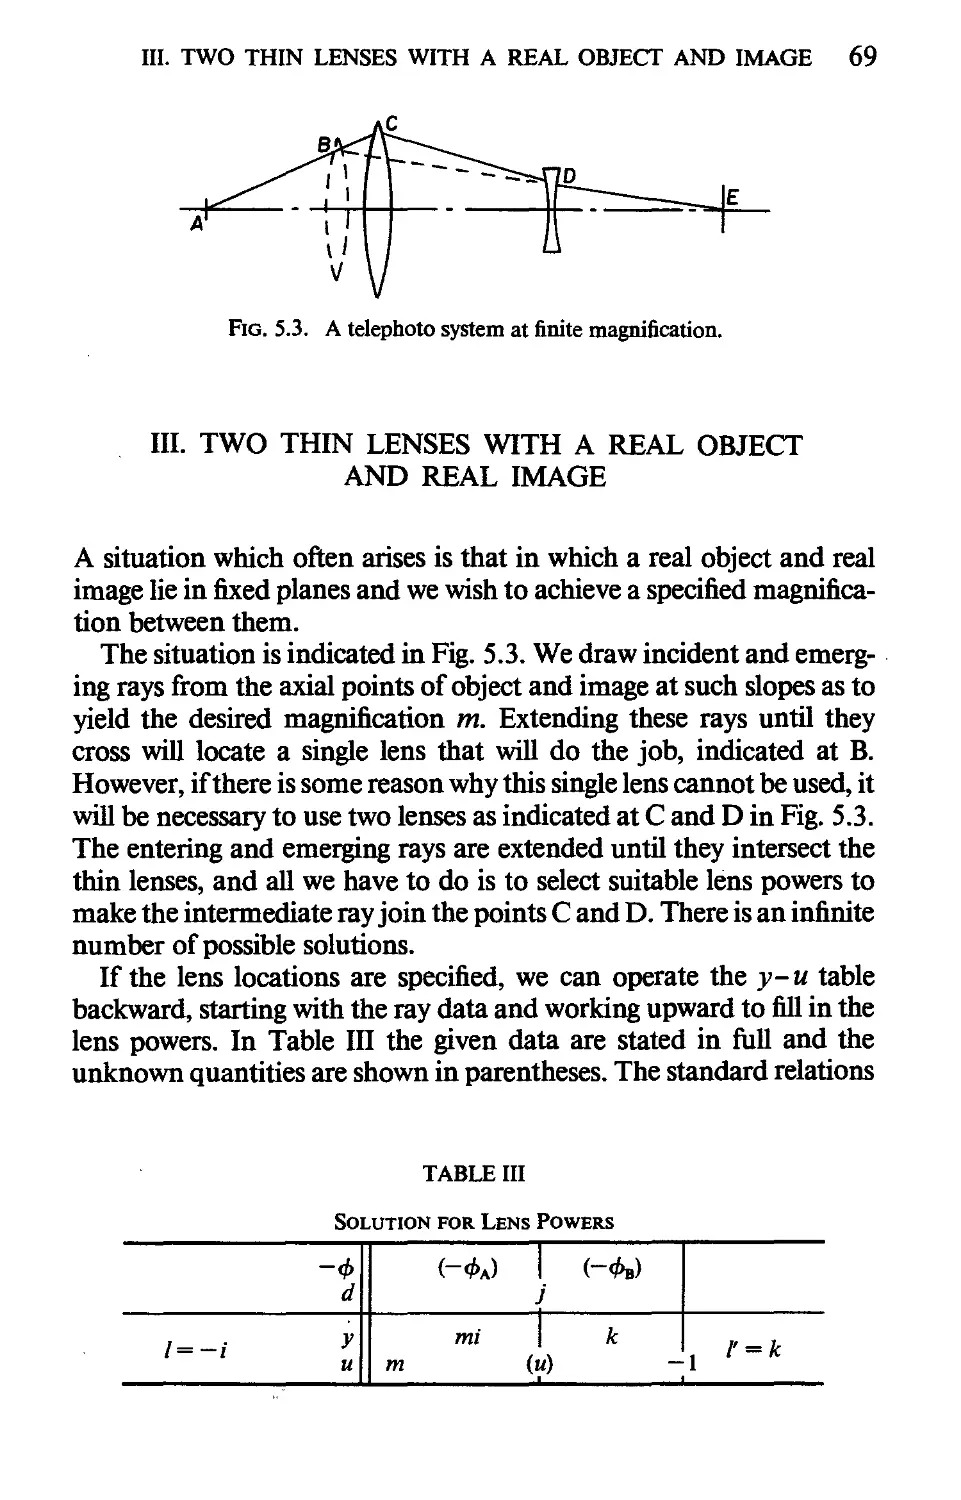 III. Two Thin Lenses With A Real Object And Real Image